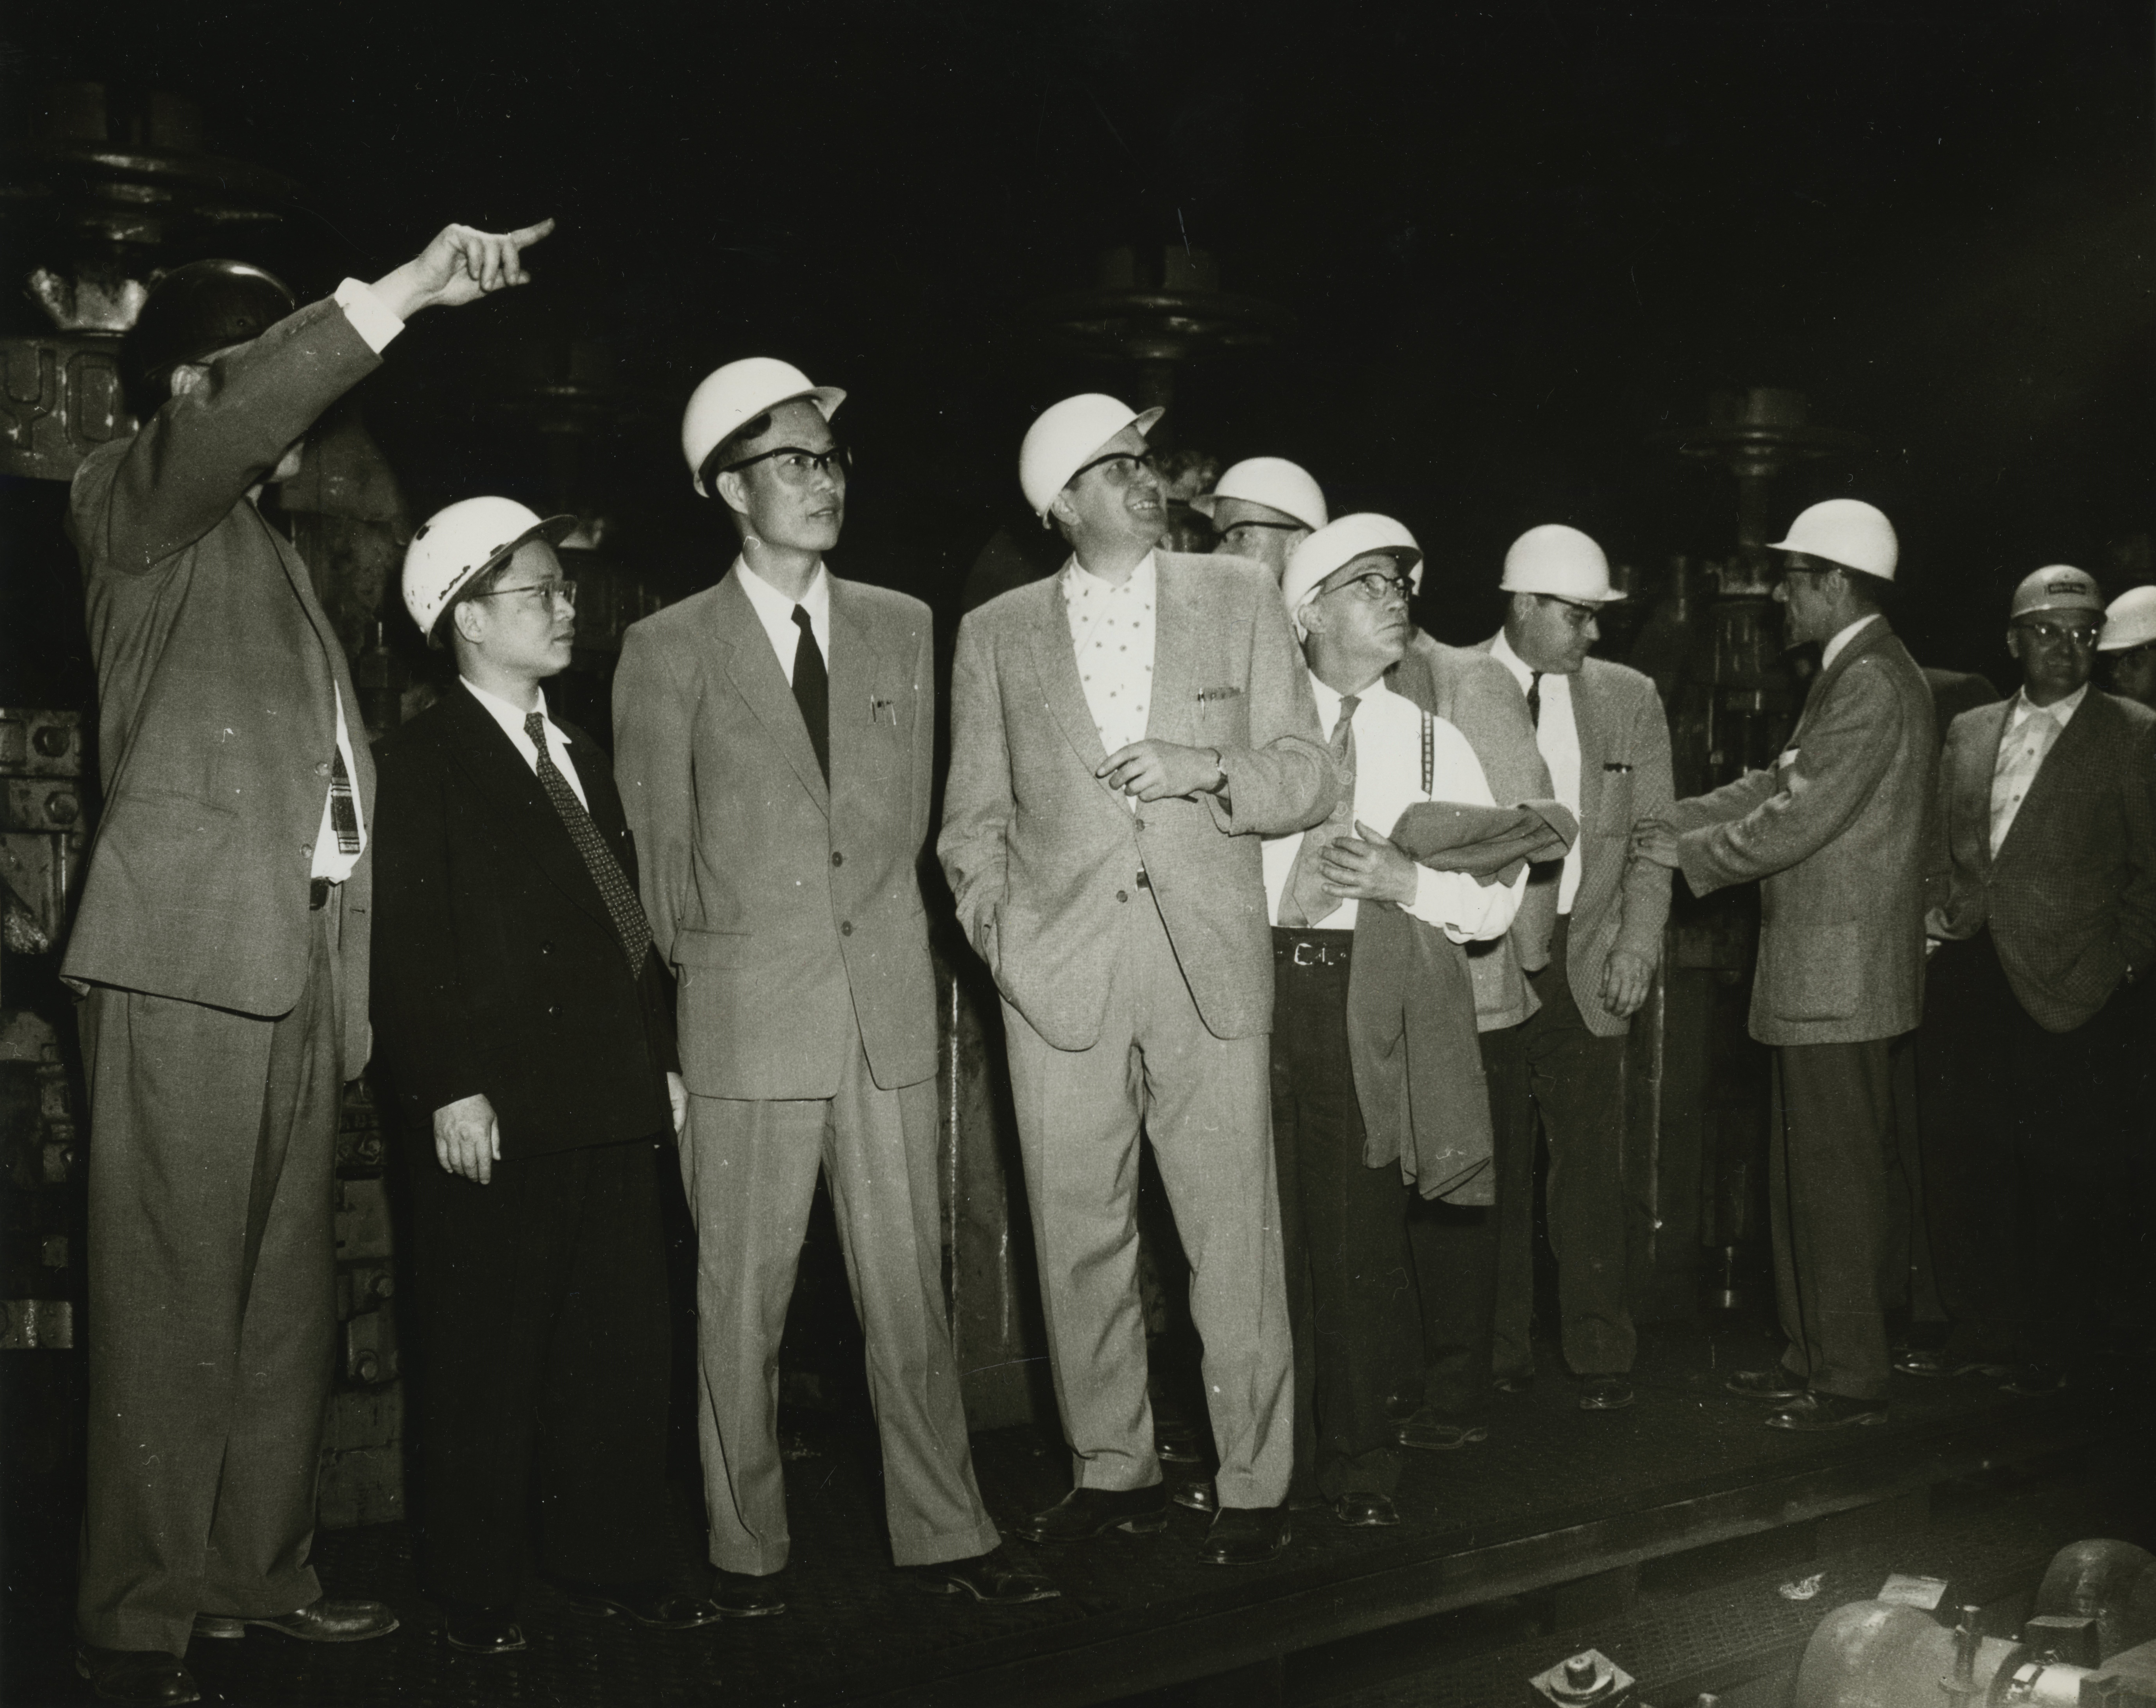 A group of men in suits and hard hats look in the distance where another man points.